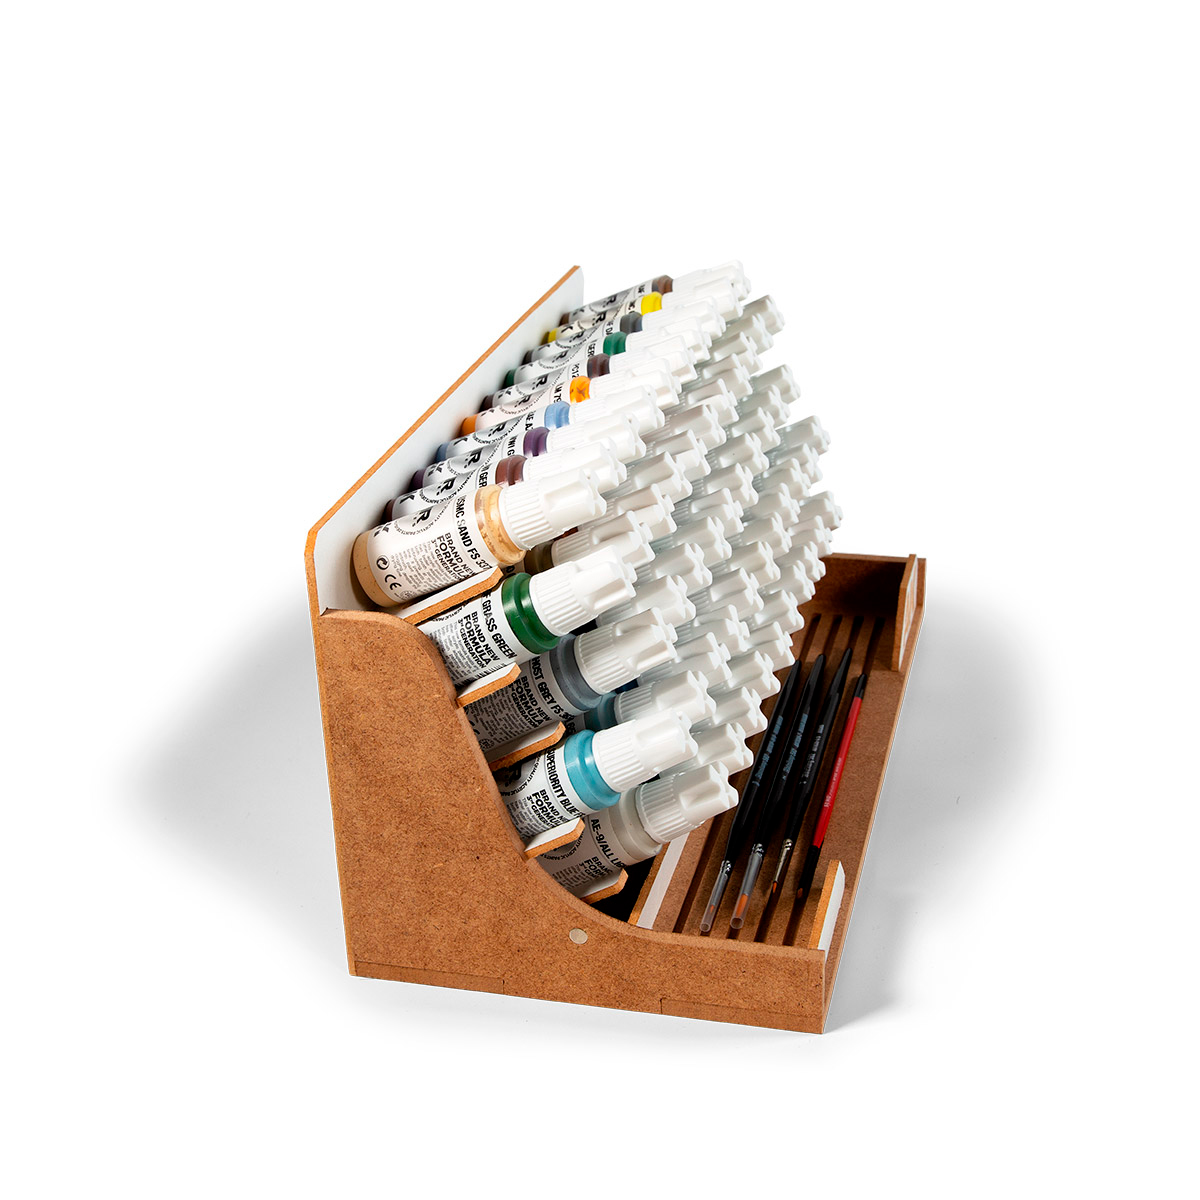 Vallejo Paint Rack - Holds 15 bottles to keep your paint station tidy